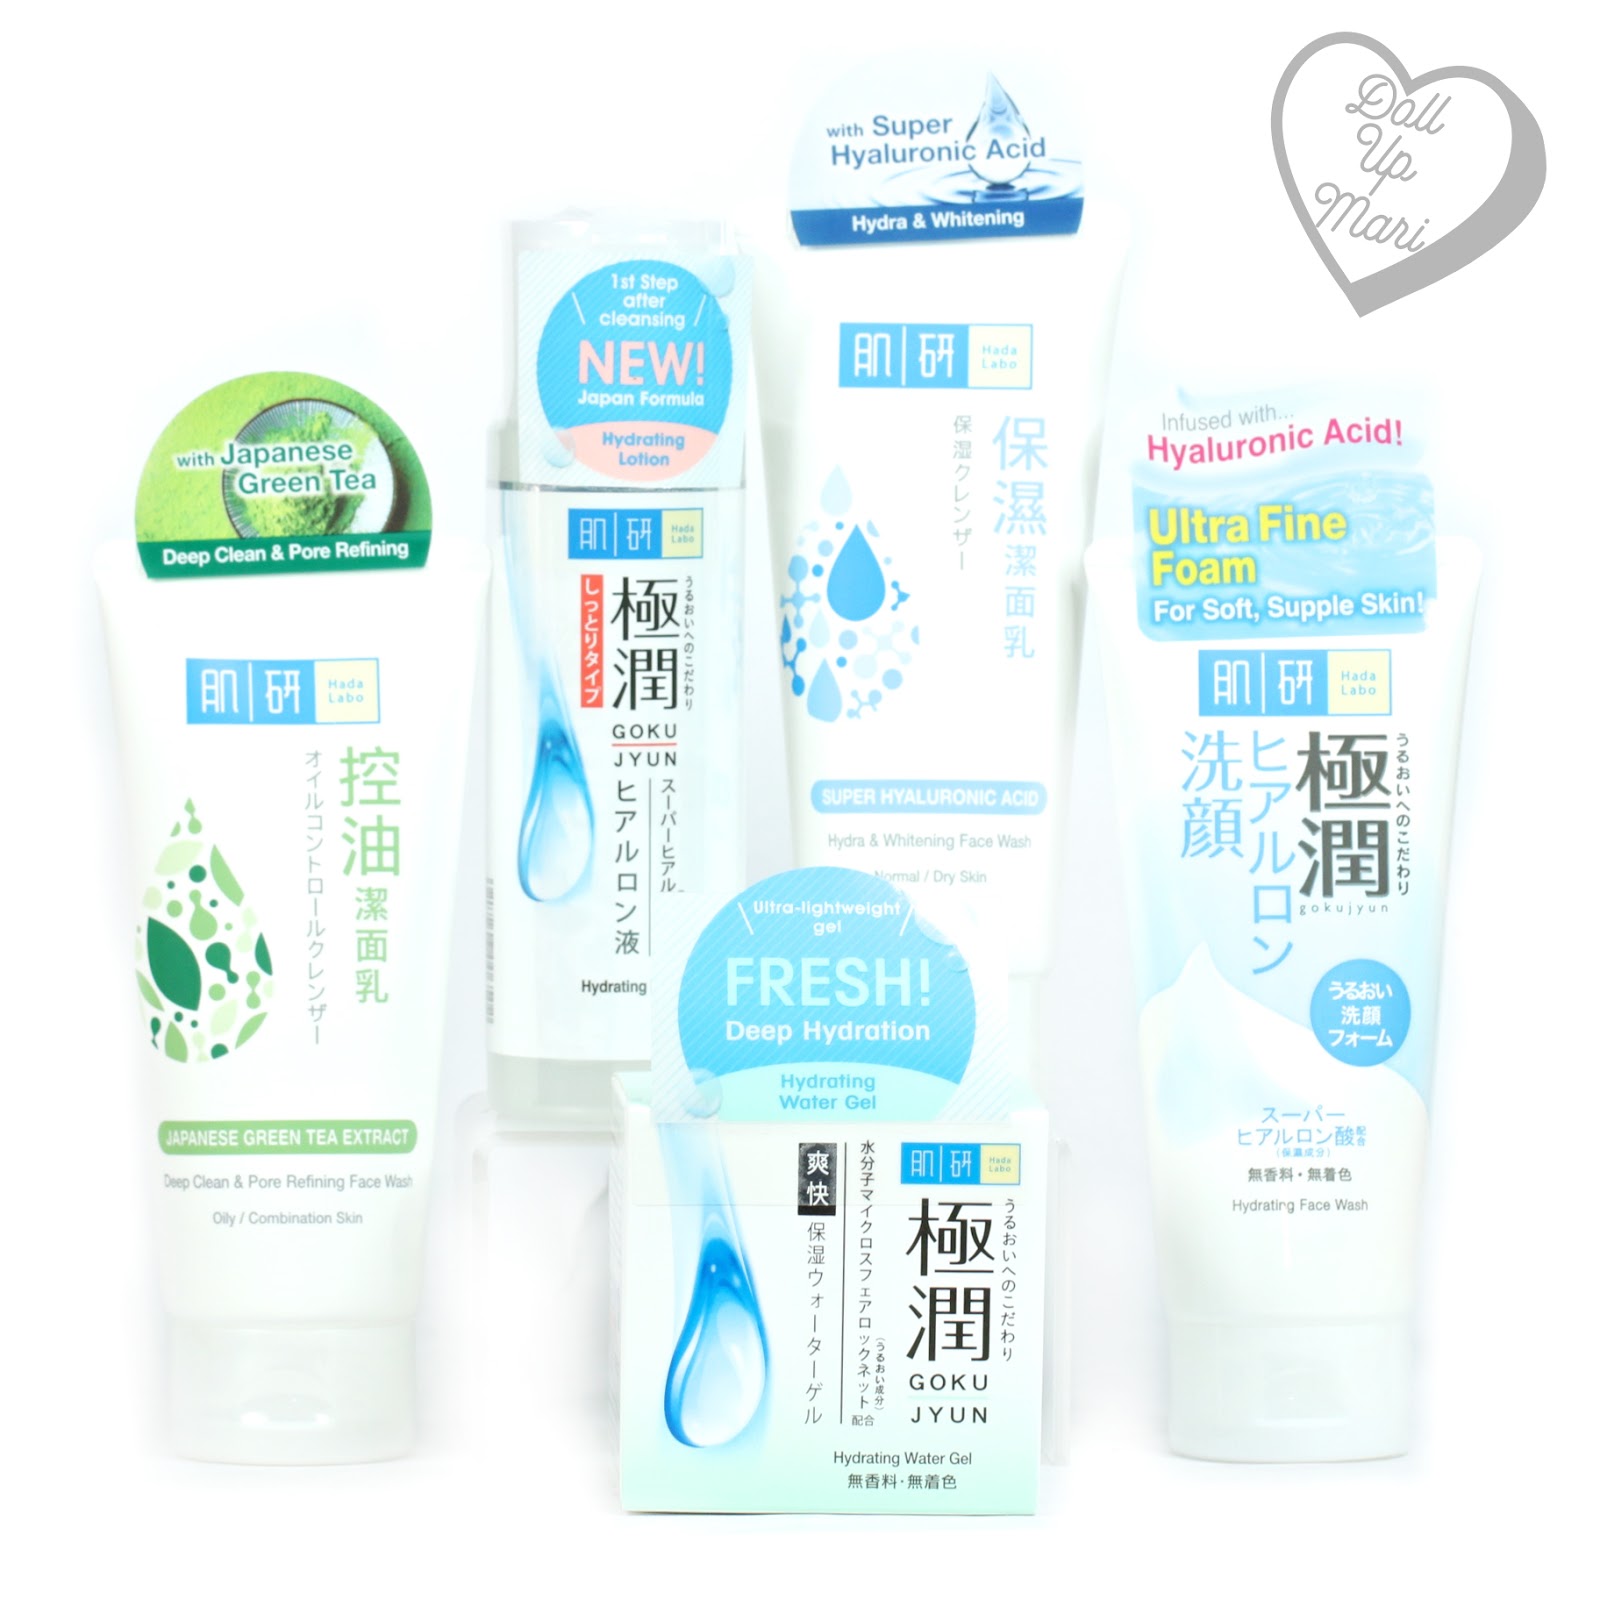 Hydrate Like the Japanese with Hada Labo!